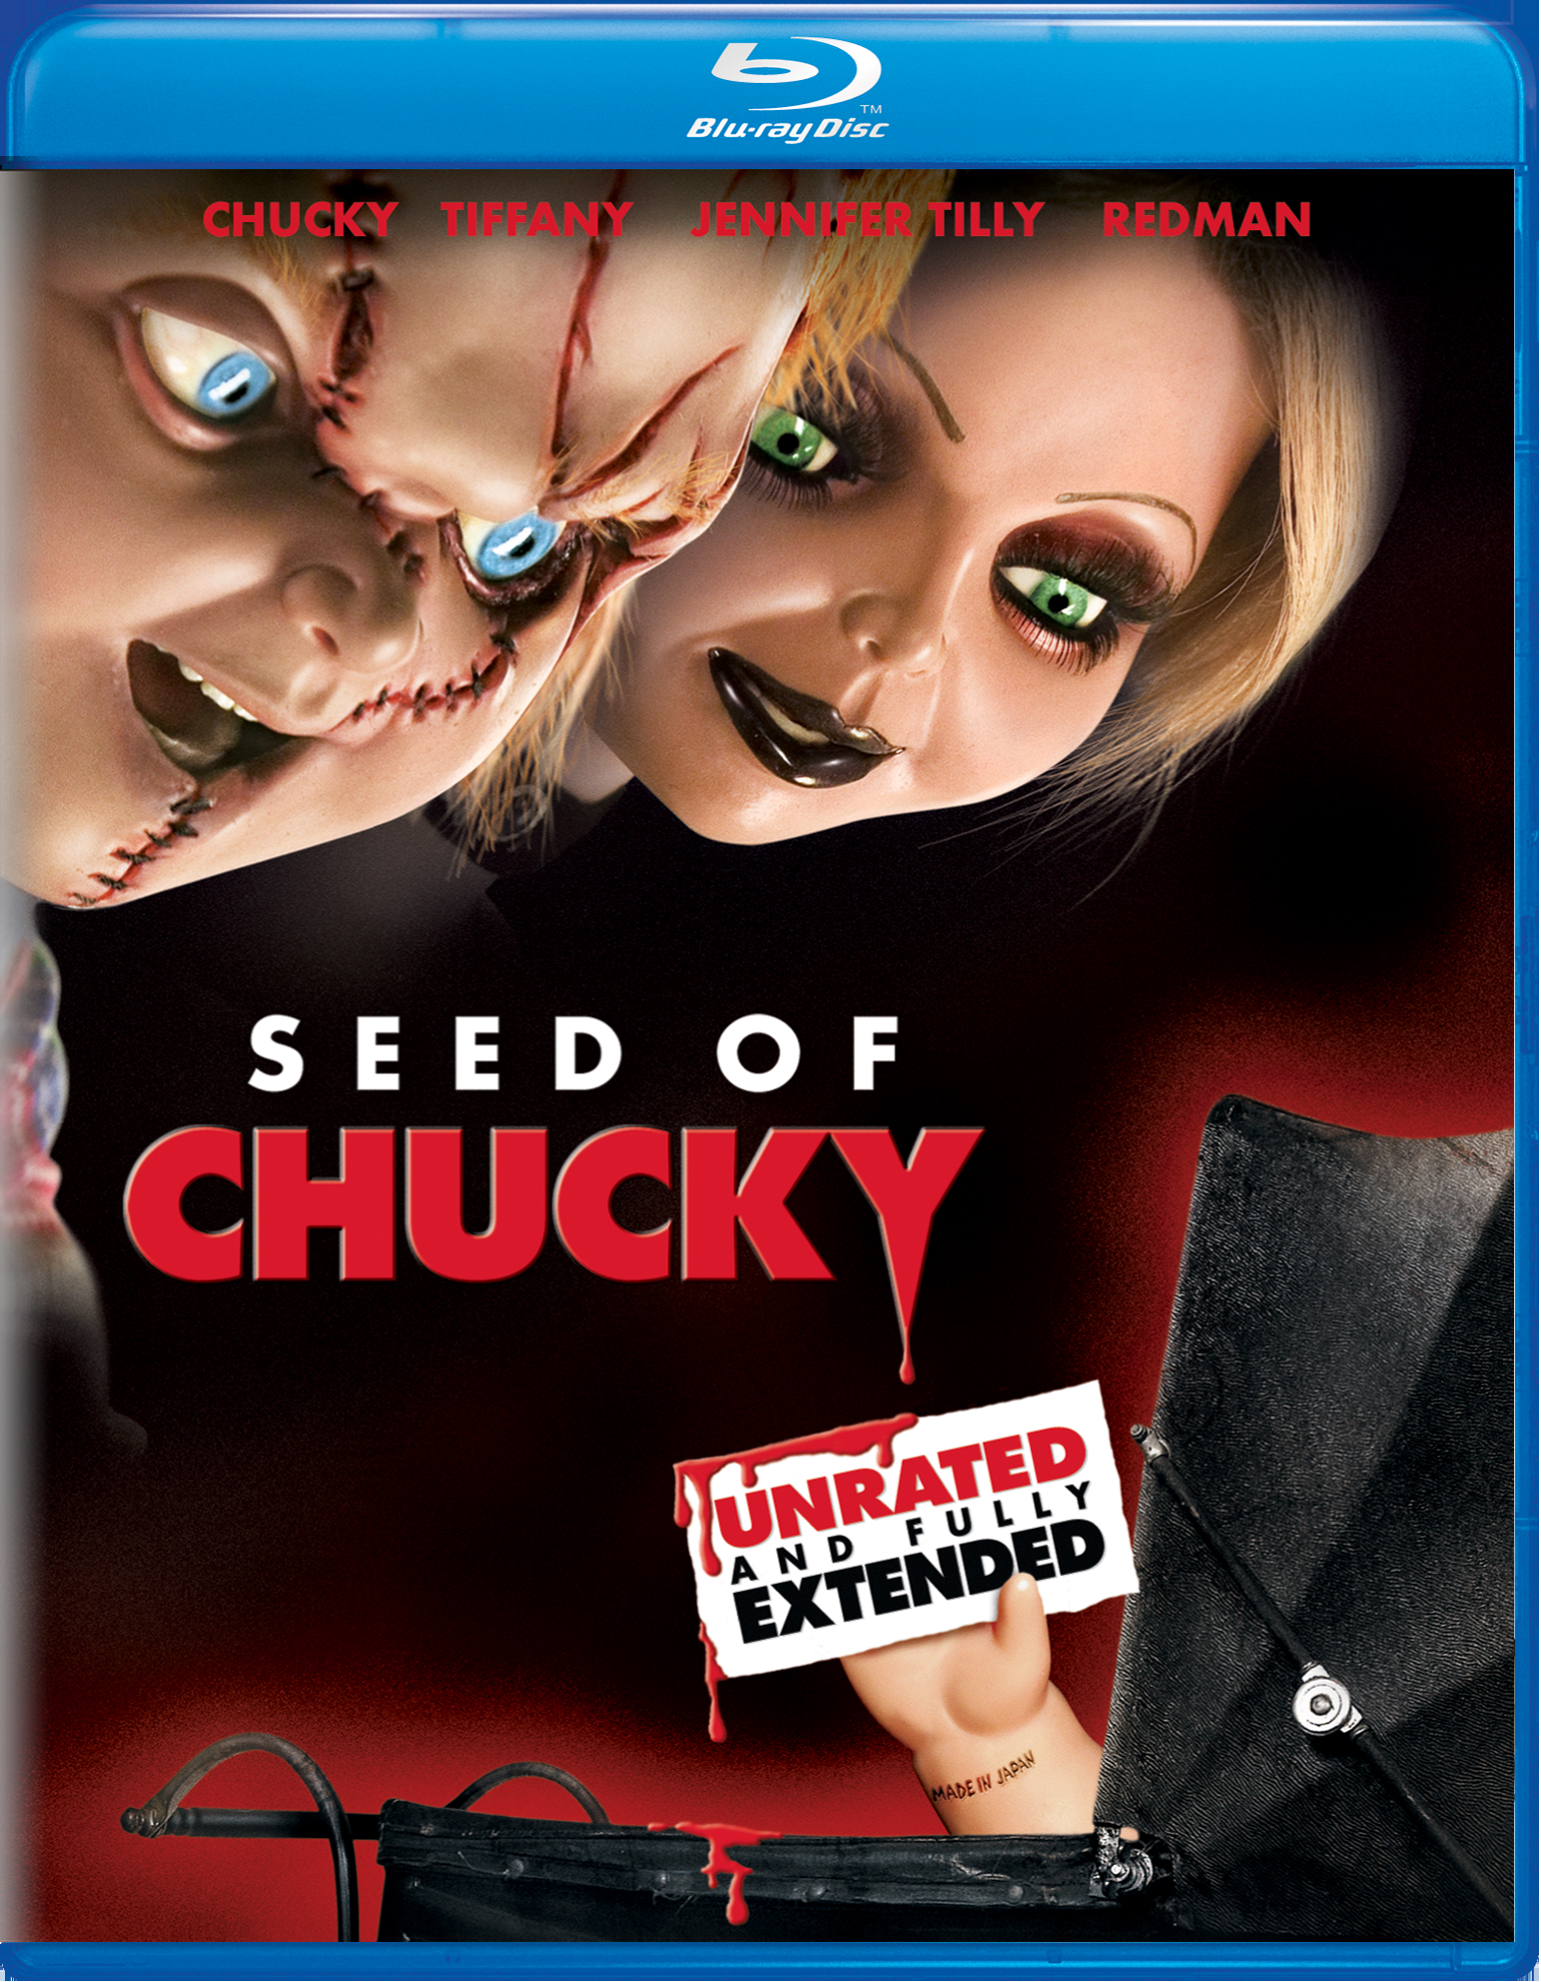 Seed Of Chucky (Blu-ray Unrated) - Blu-ray [ 2004 ]  - Horror Movies On Blu-ray - Movies On GRUV